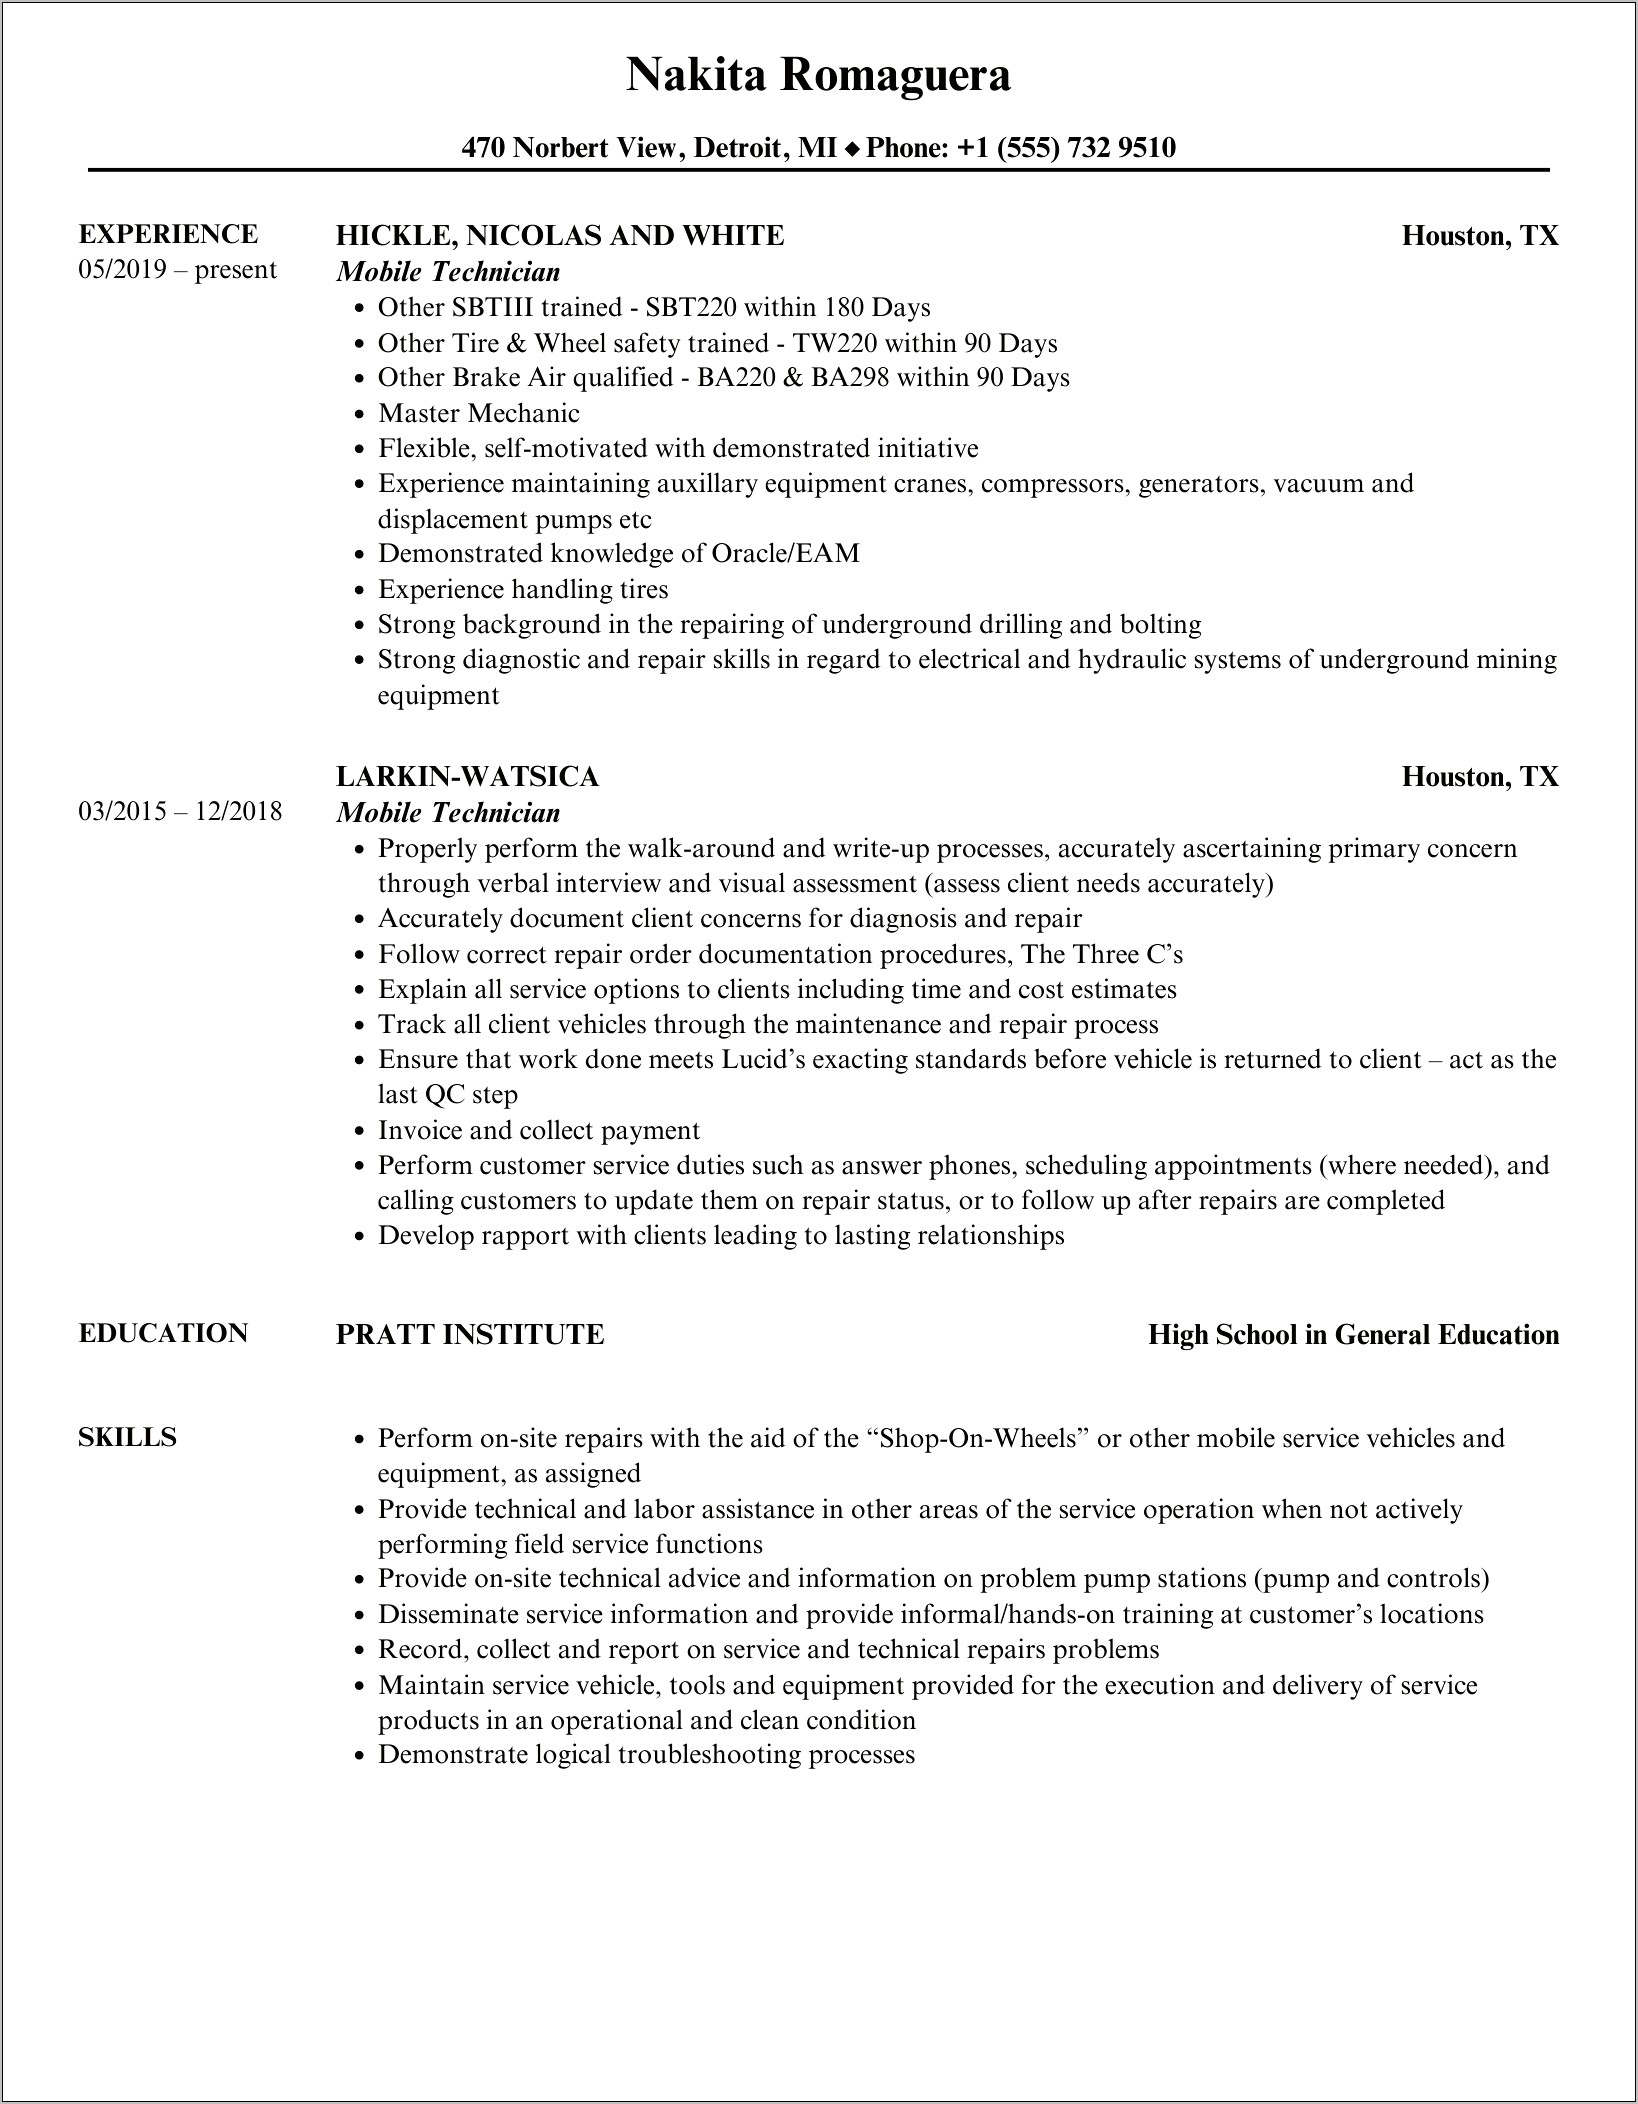 Cell Phone Technician Resume Objective